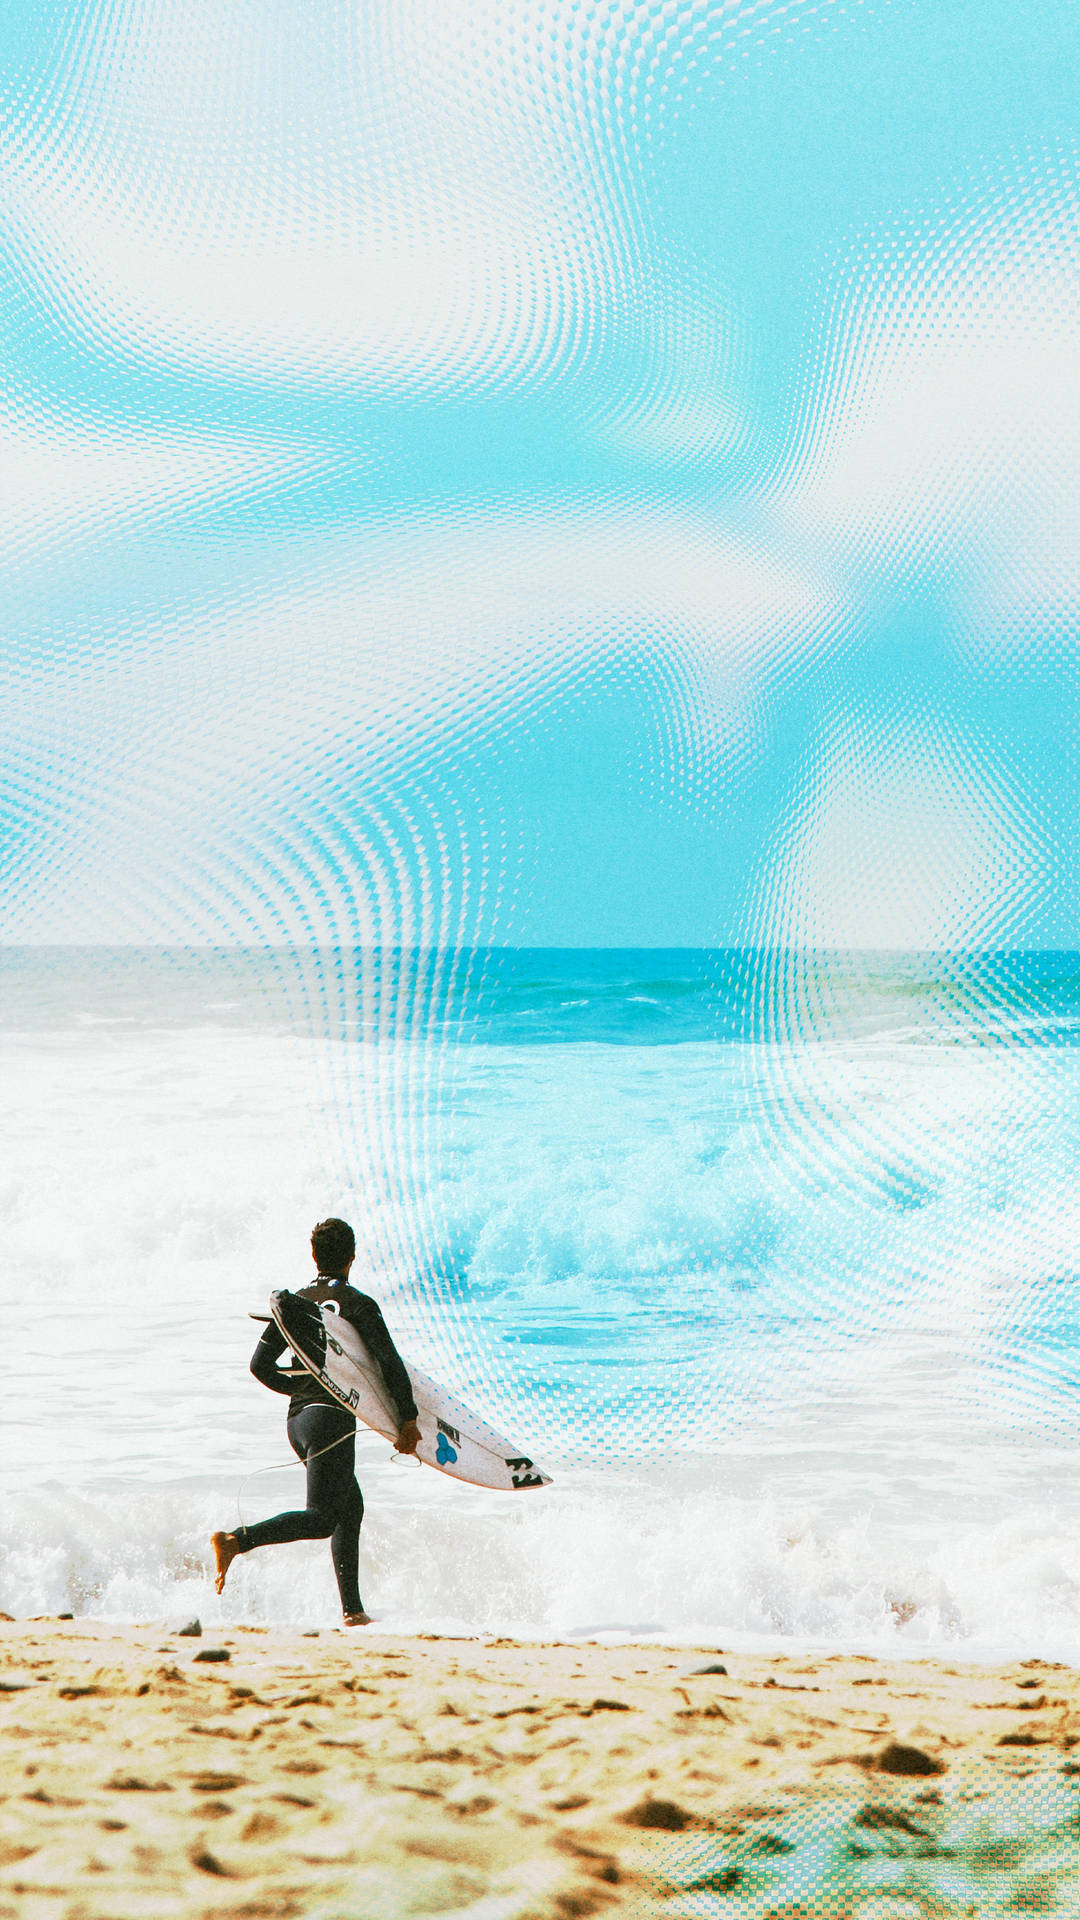 Surfing Blue Sky And Sea Background